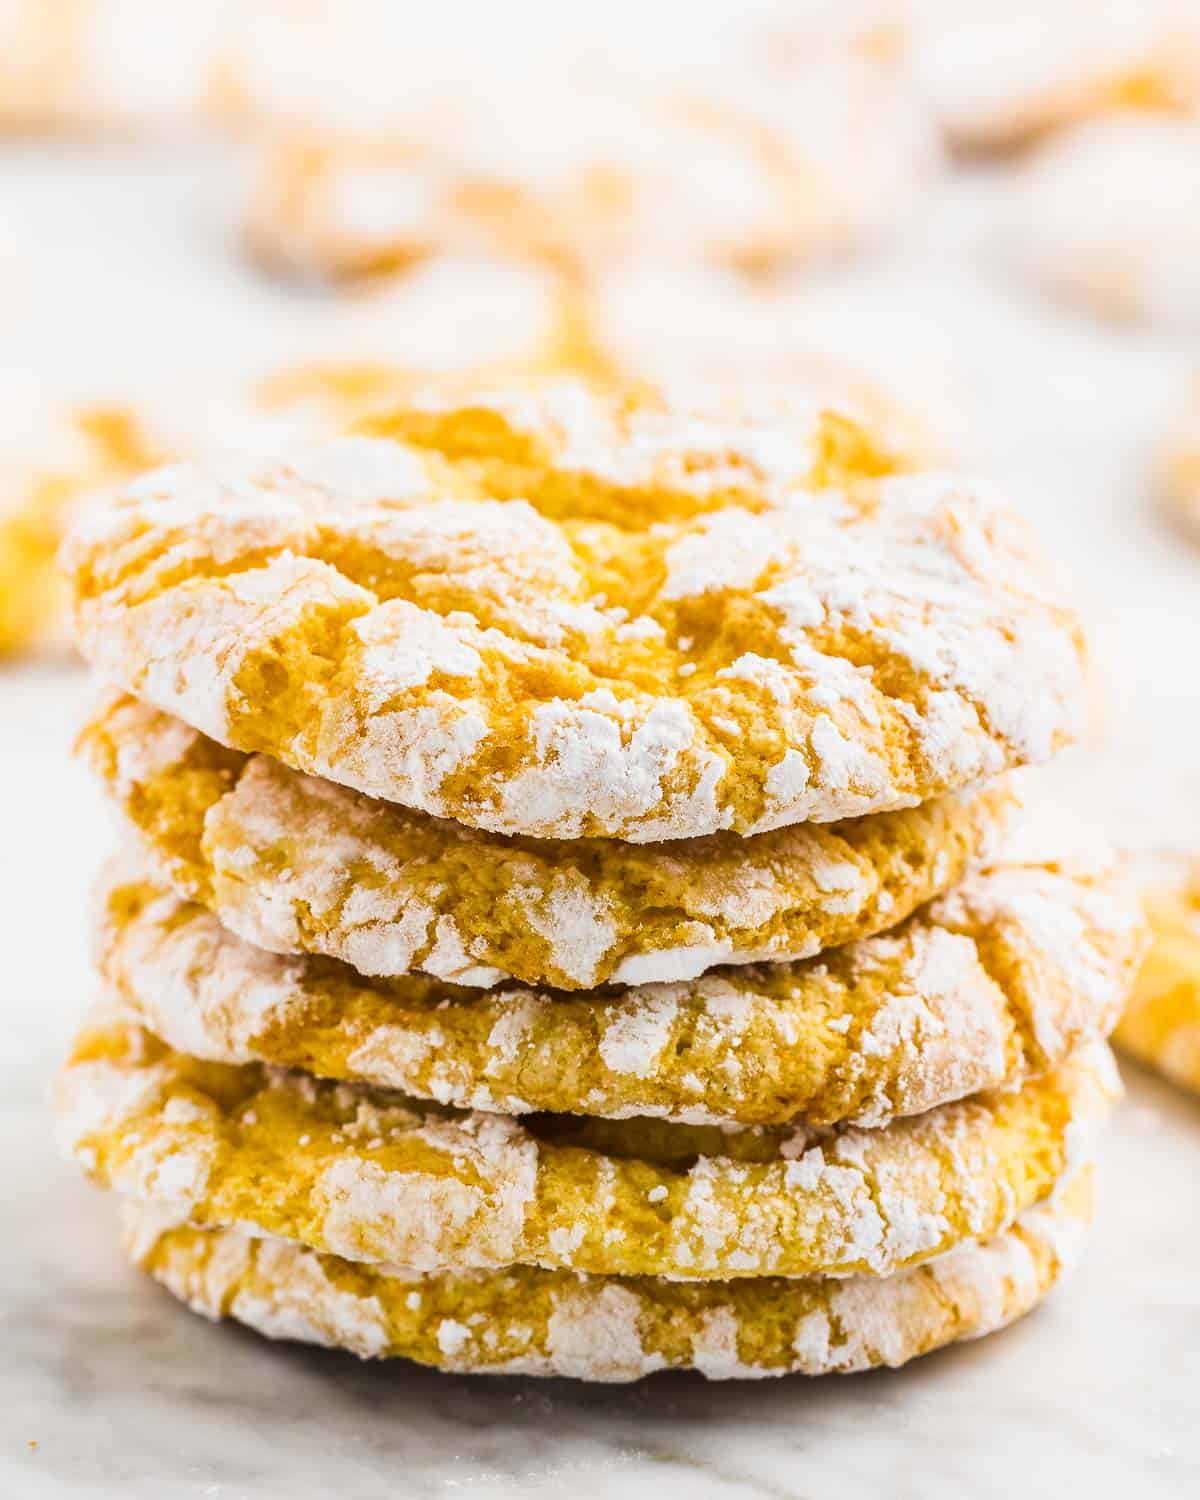 A stack of freshly baked Lemon Cool Whip cookies.